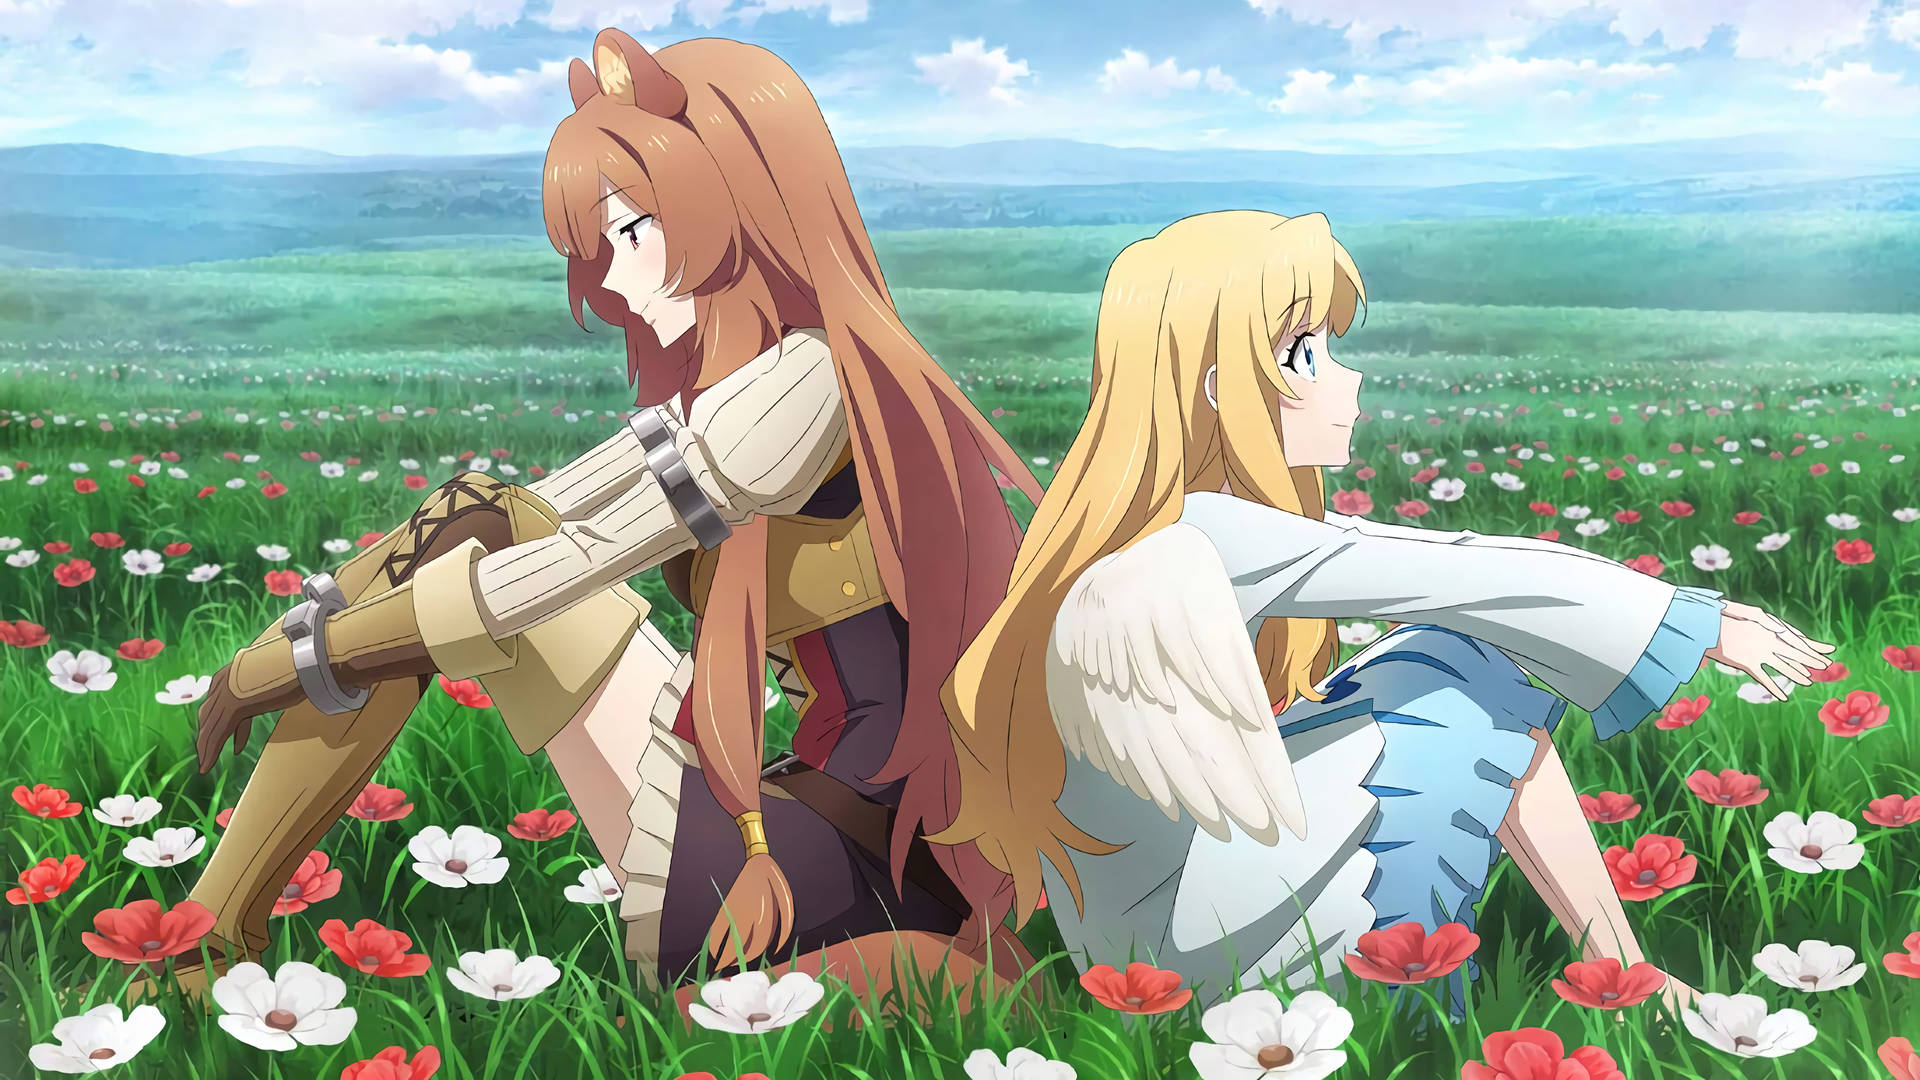 Two Anime Girls Sitting In A Field Of Flowers